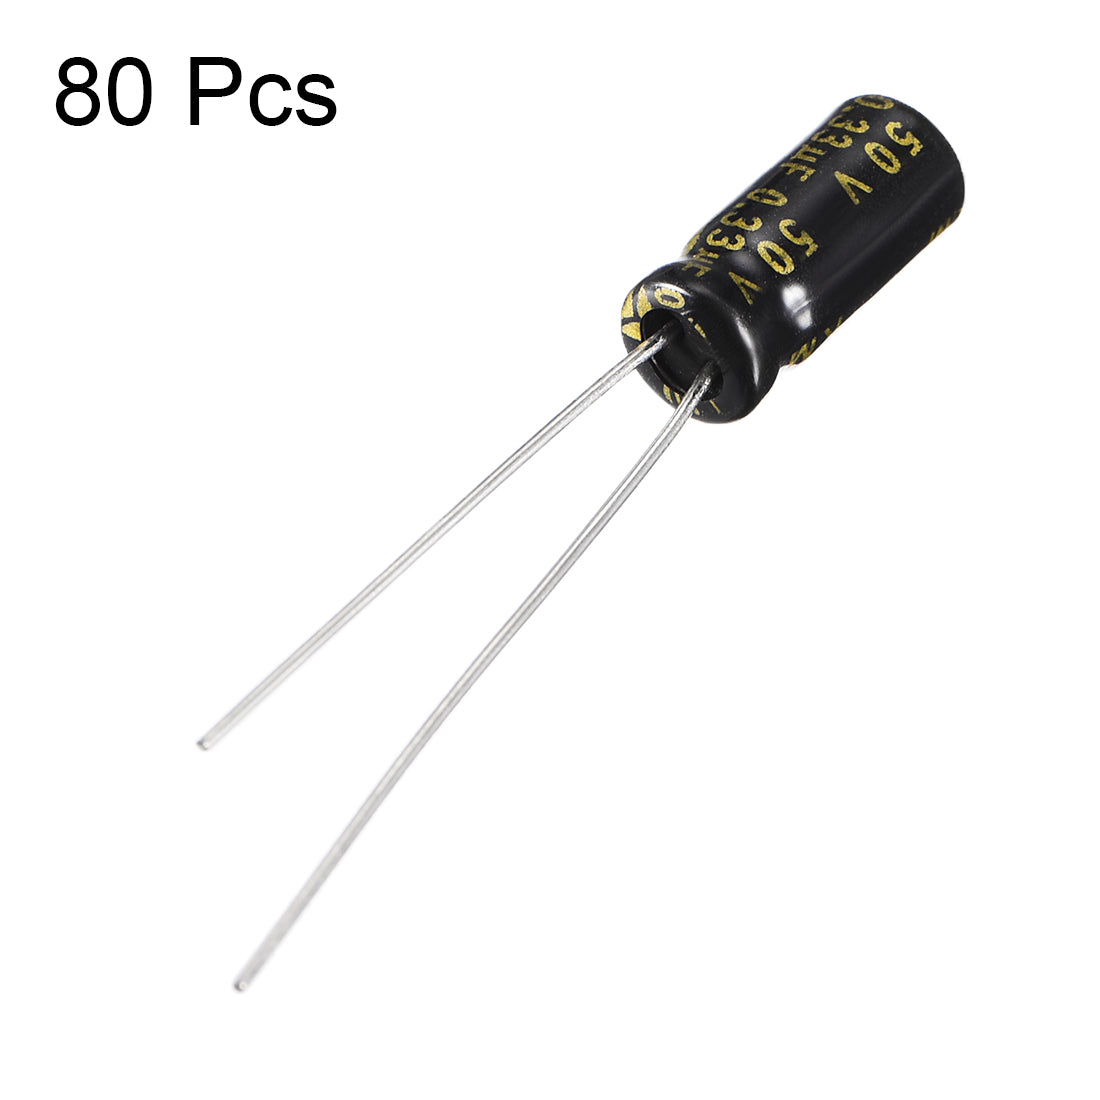 uxcell Uxcell Aluminum Radial Electrolytic Capacitor with 0.33uF 50V 105 Celsius Life 2000H 5 x 11 mm Black 80pcs